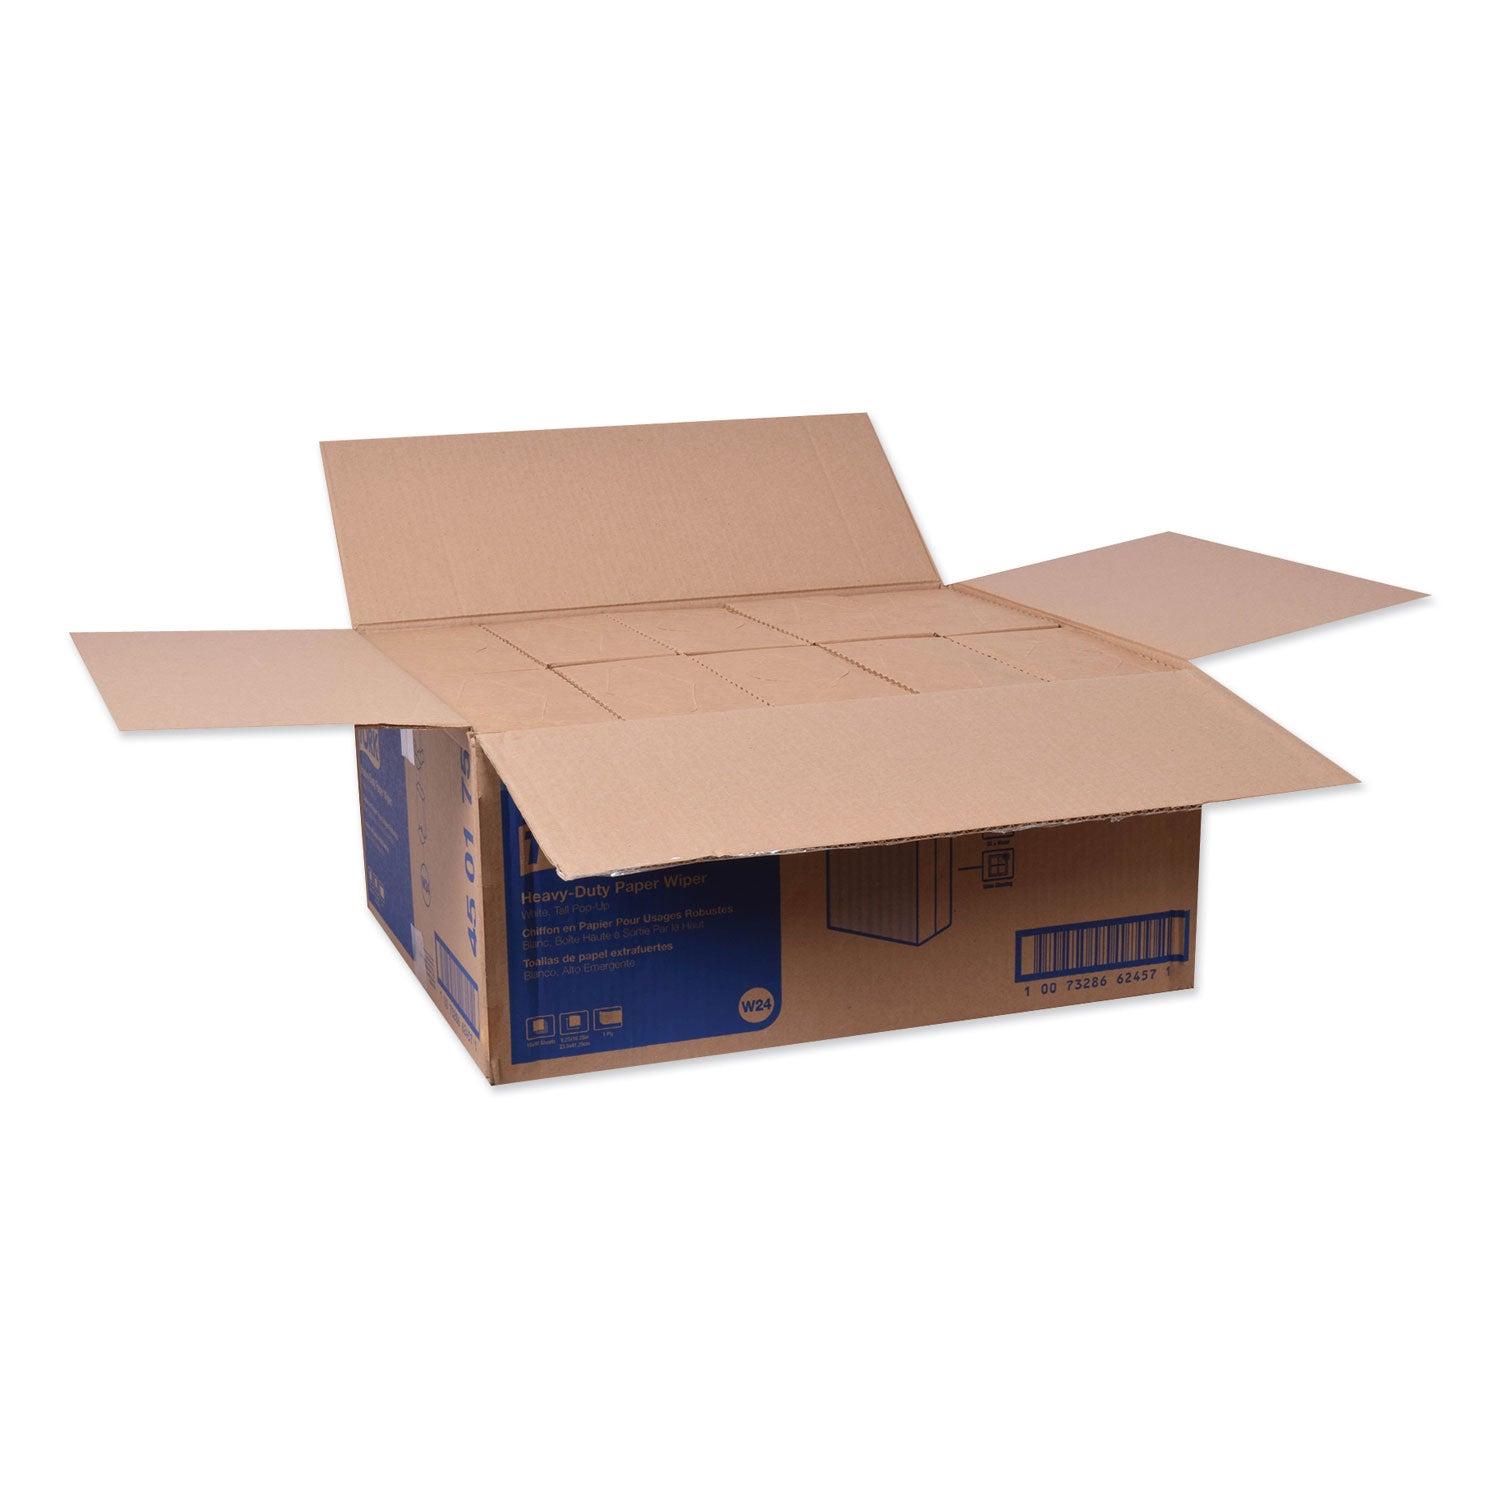 heavy-duty-paper-wiper-1-ply-925-x-1625-unscented-white-90-wipes-box-10-boxes-carton_trk450175 - 3